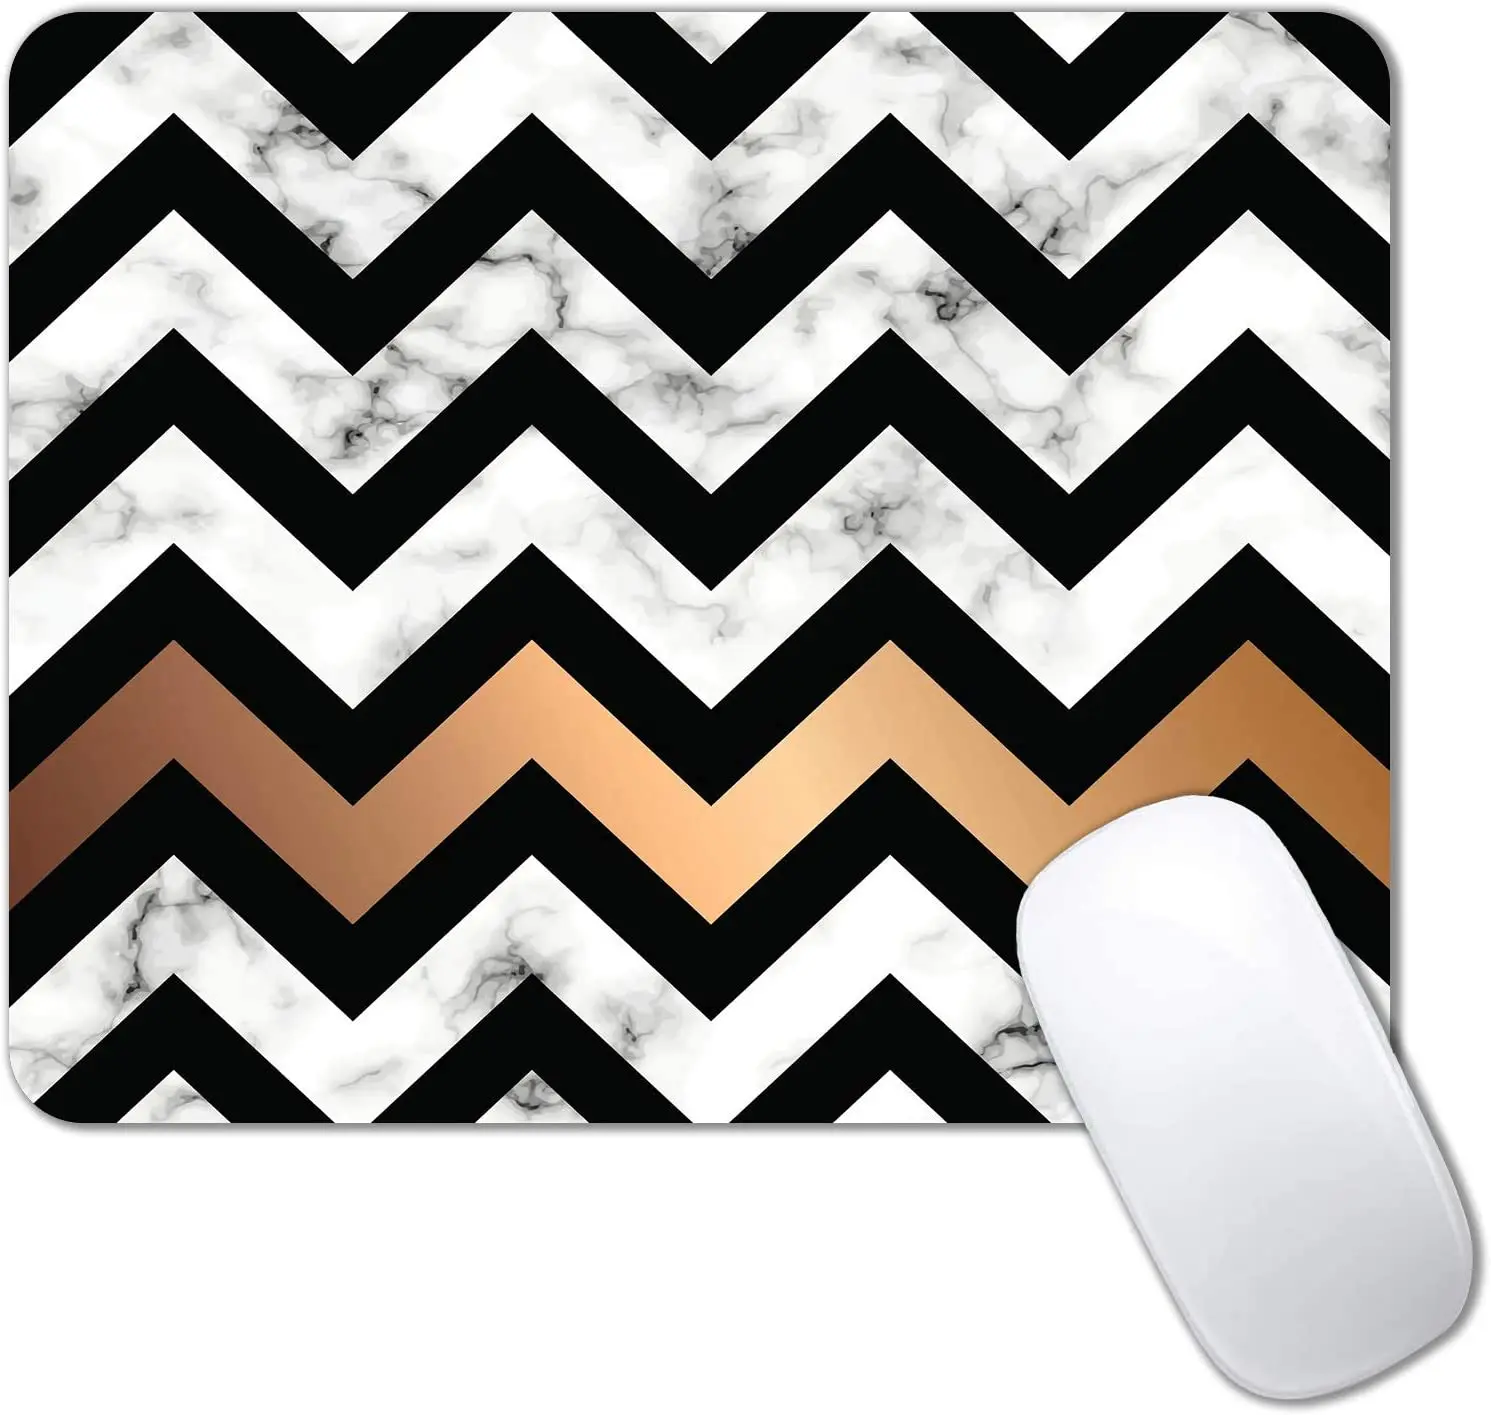 Chevron Pattern Mouse Pad Wavy Geometric Stripe Line Black White and Gold Mouse Pads Non-Slip Rubber Base for Computer Laptop